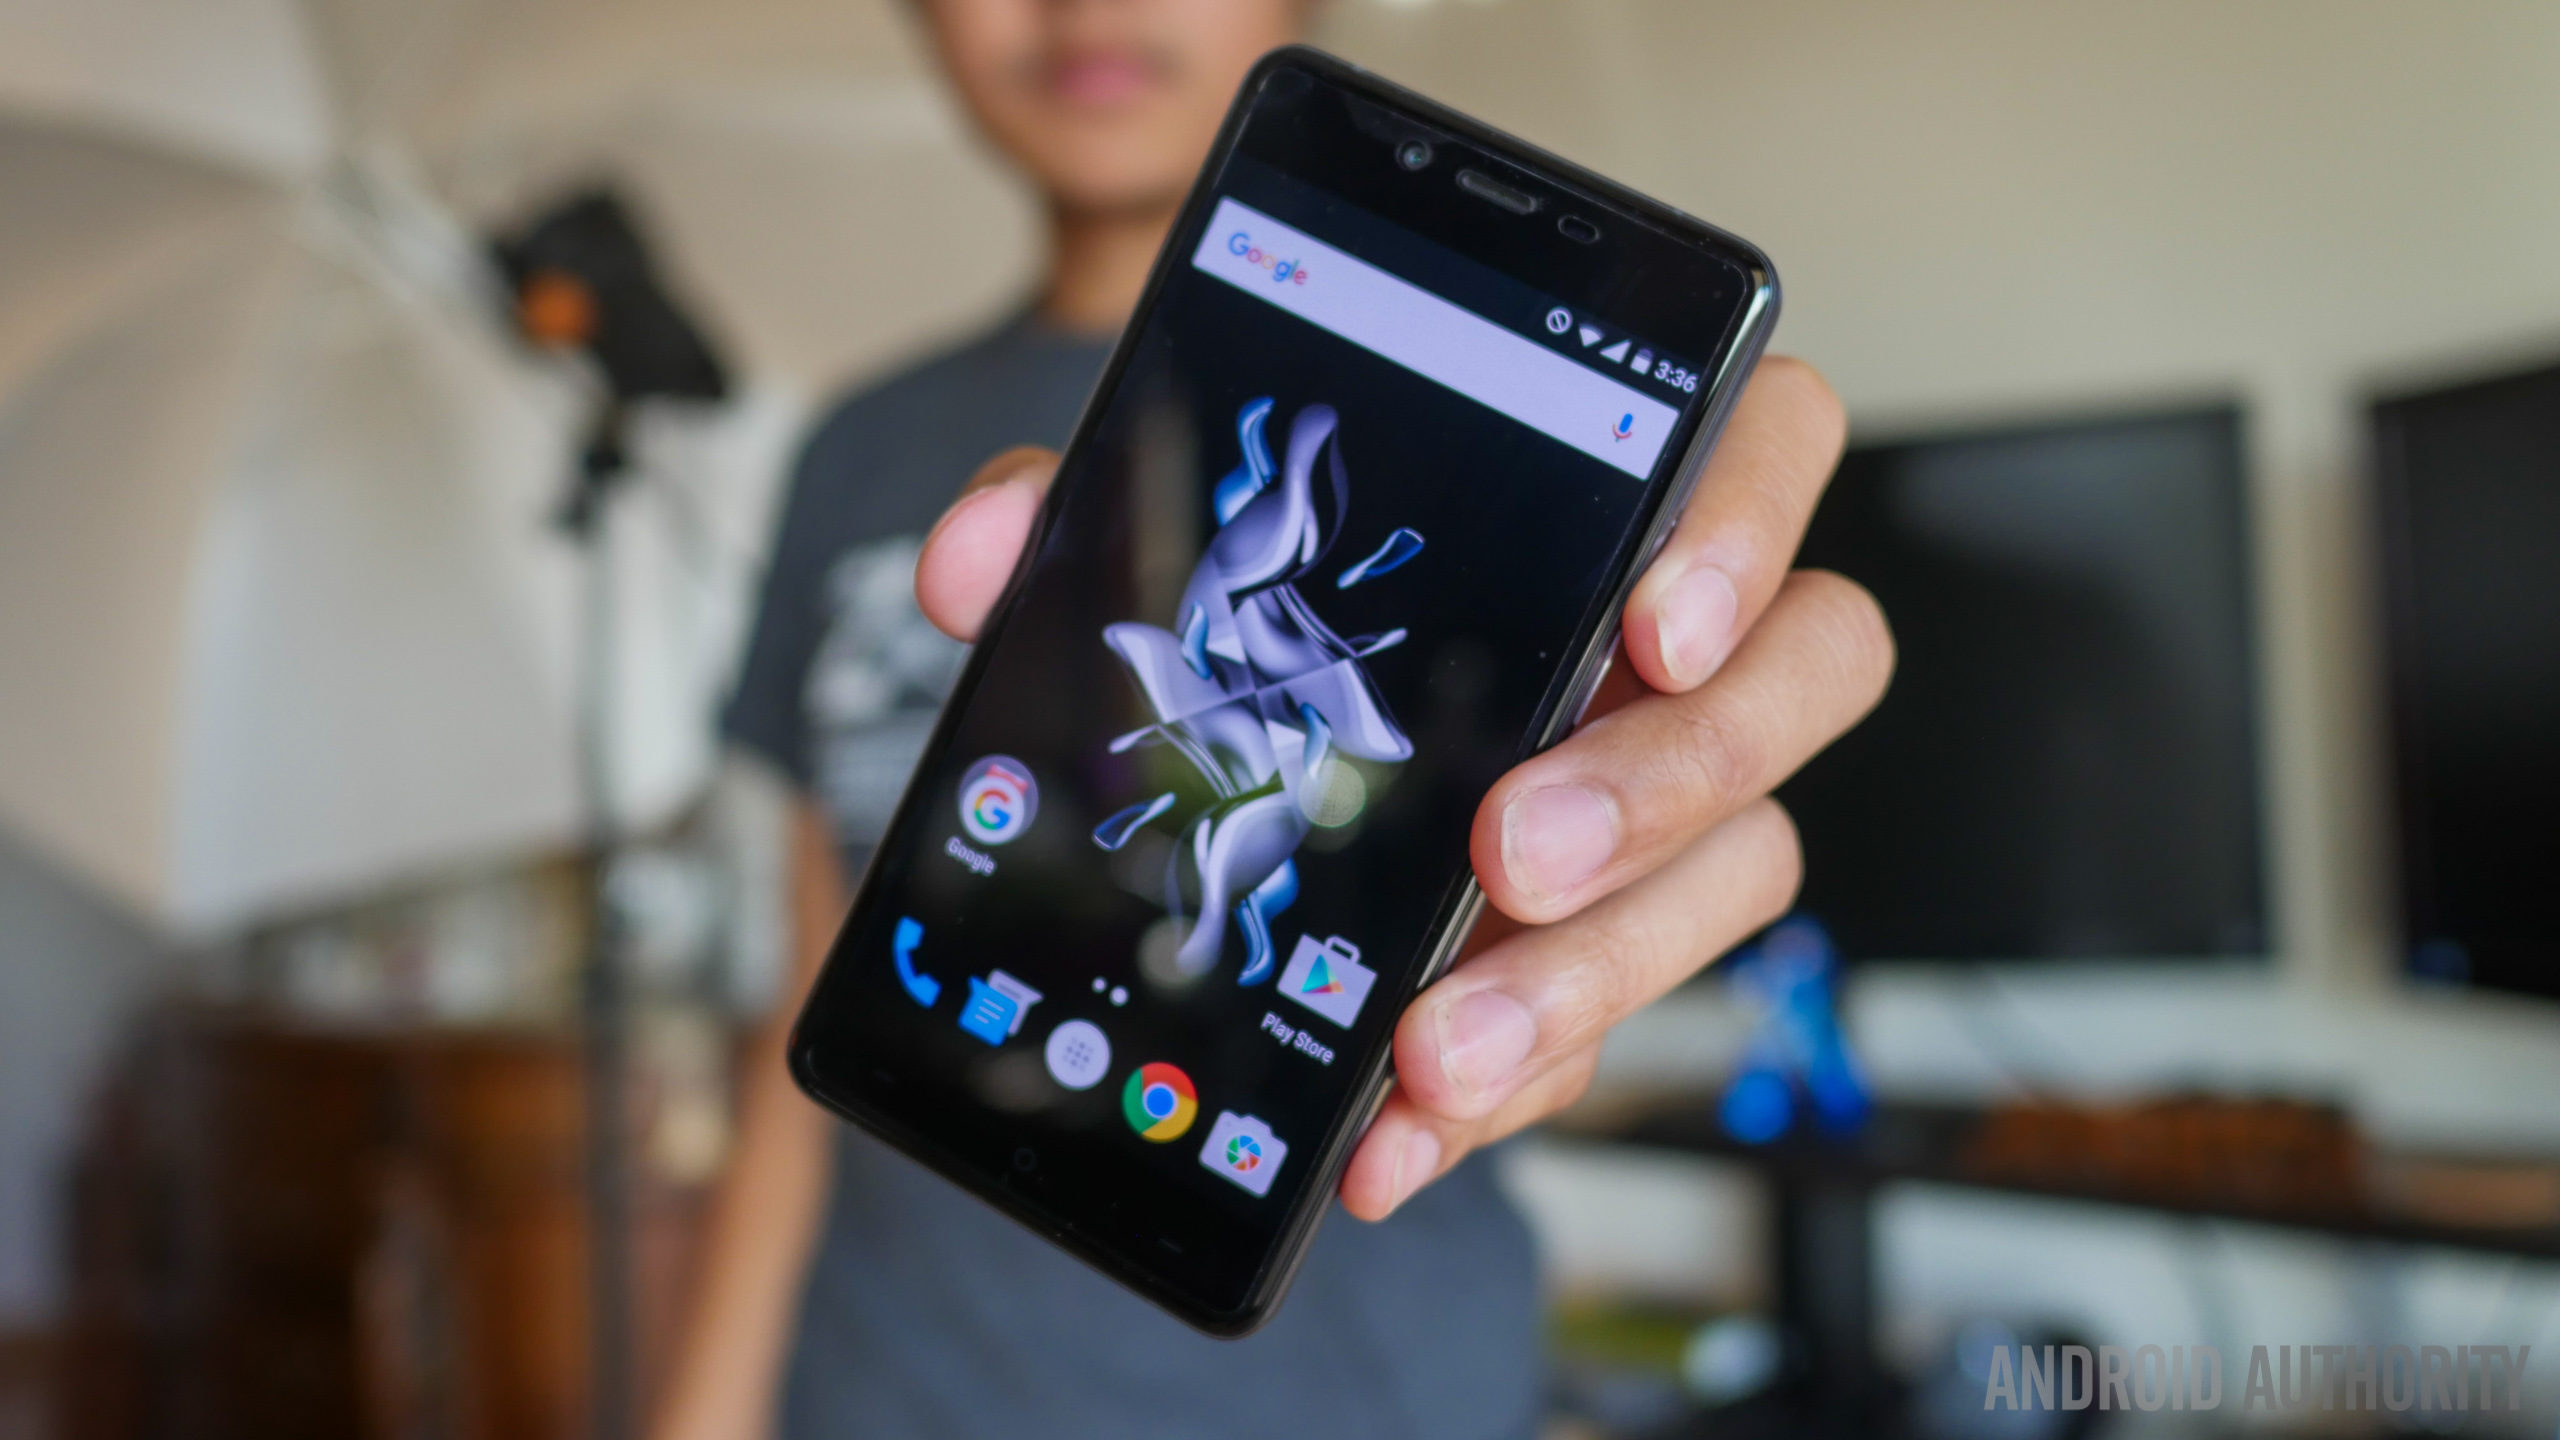 oneplus x first 48 hours aa (21 of 33)